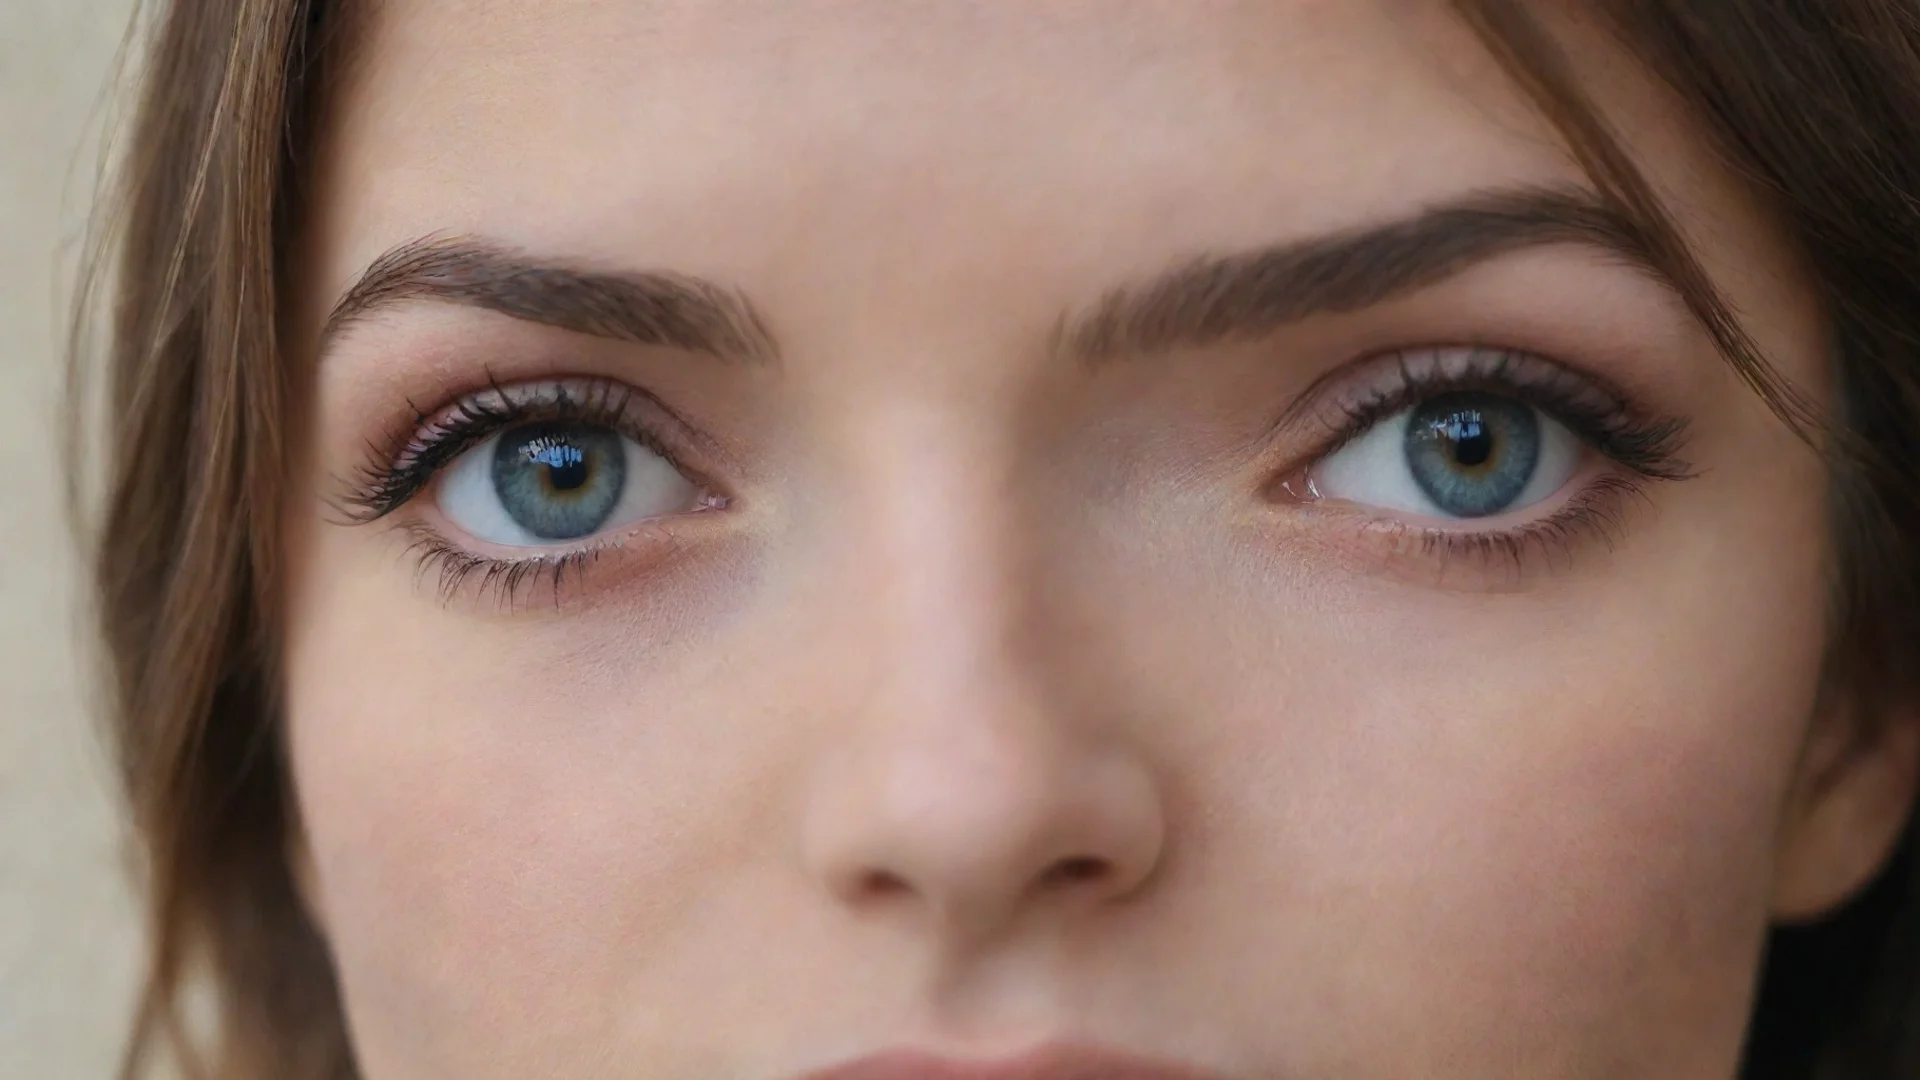 eyes close up face beautiful looking girl super close up face eyes dramatic hd amazing shot aesthetic wide